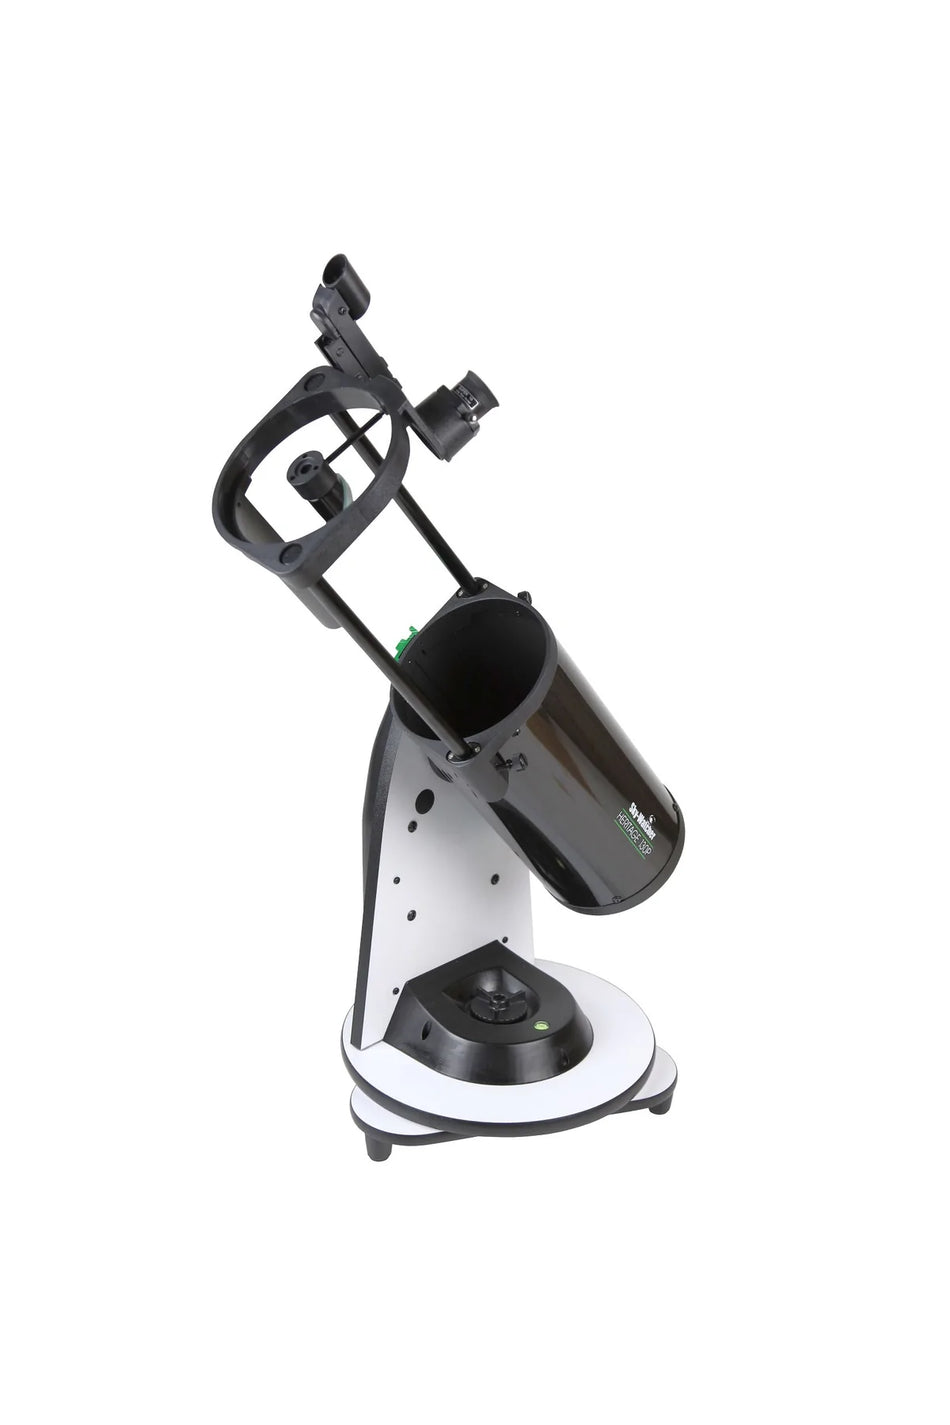 Sky-Watcher Virtuoso GTi 130P - 130 mm f/5 GoTo Collapsible Dobsonian with FREE Bonuses! - S21210